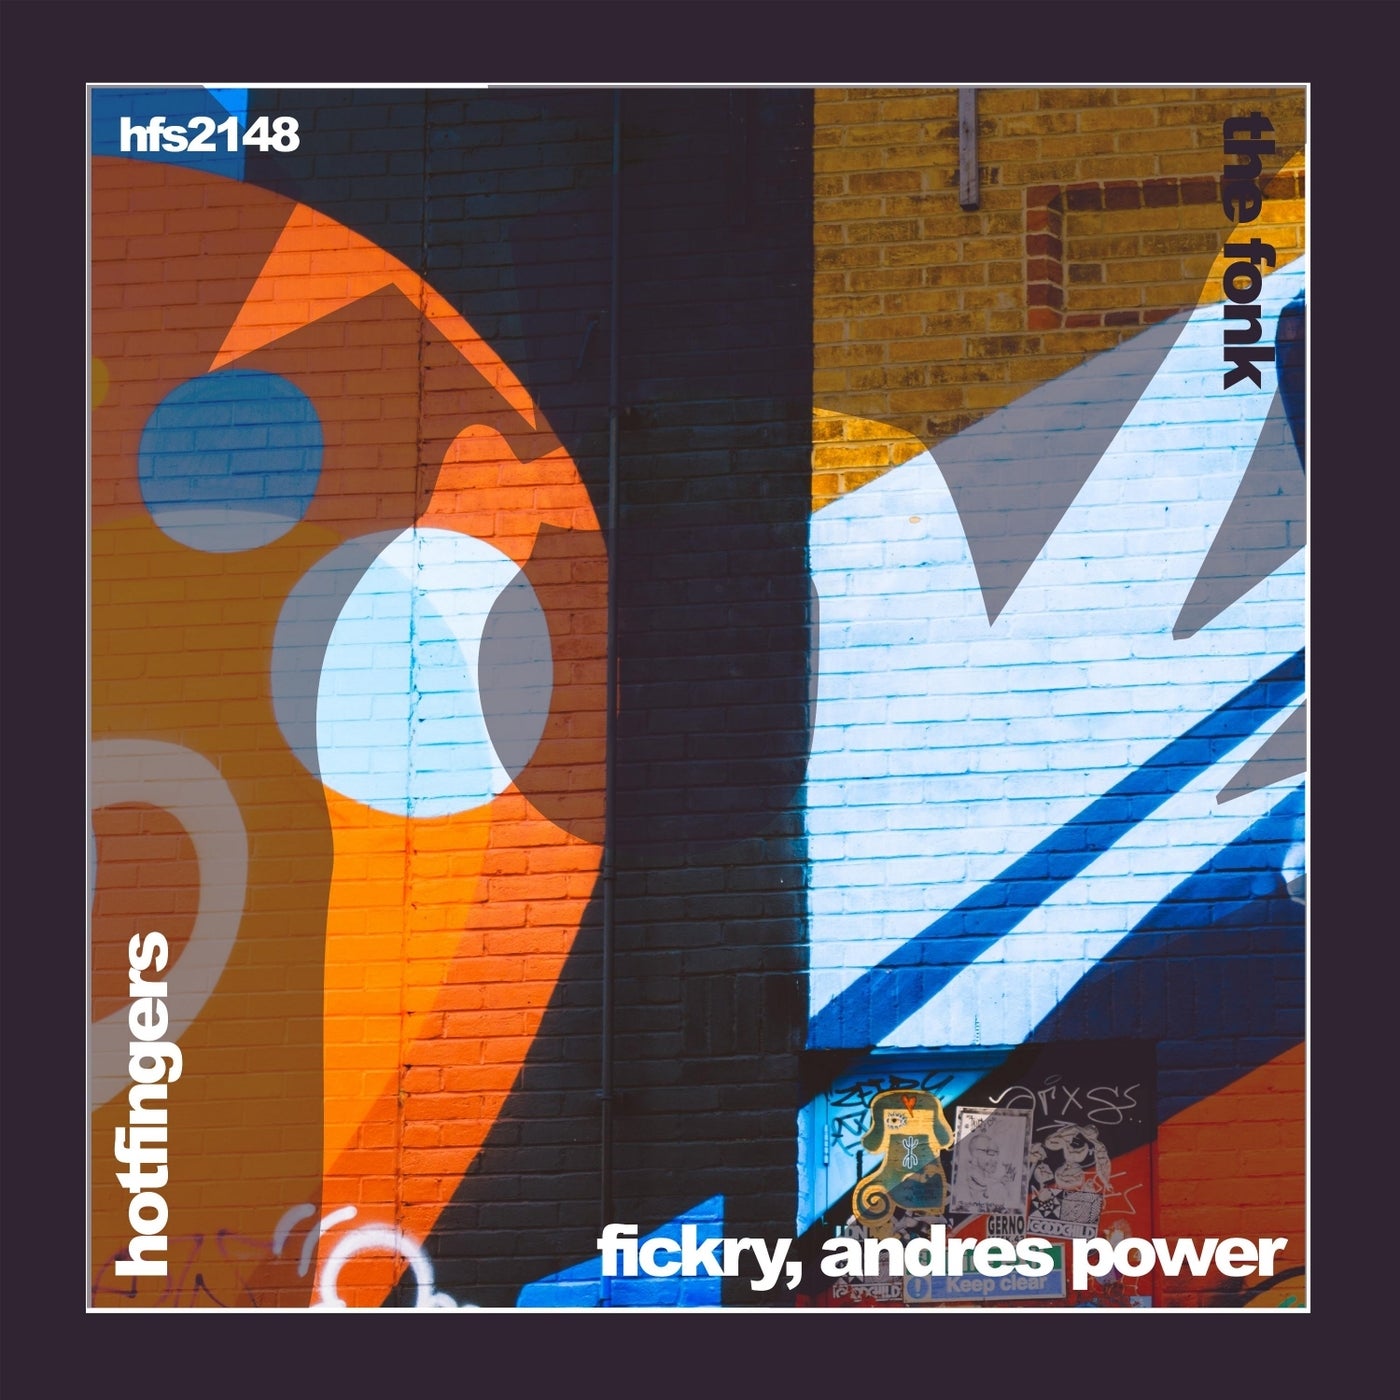 Fickry, Andres Power – The Fonk [HFS2148]